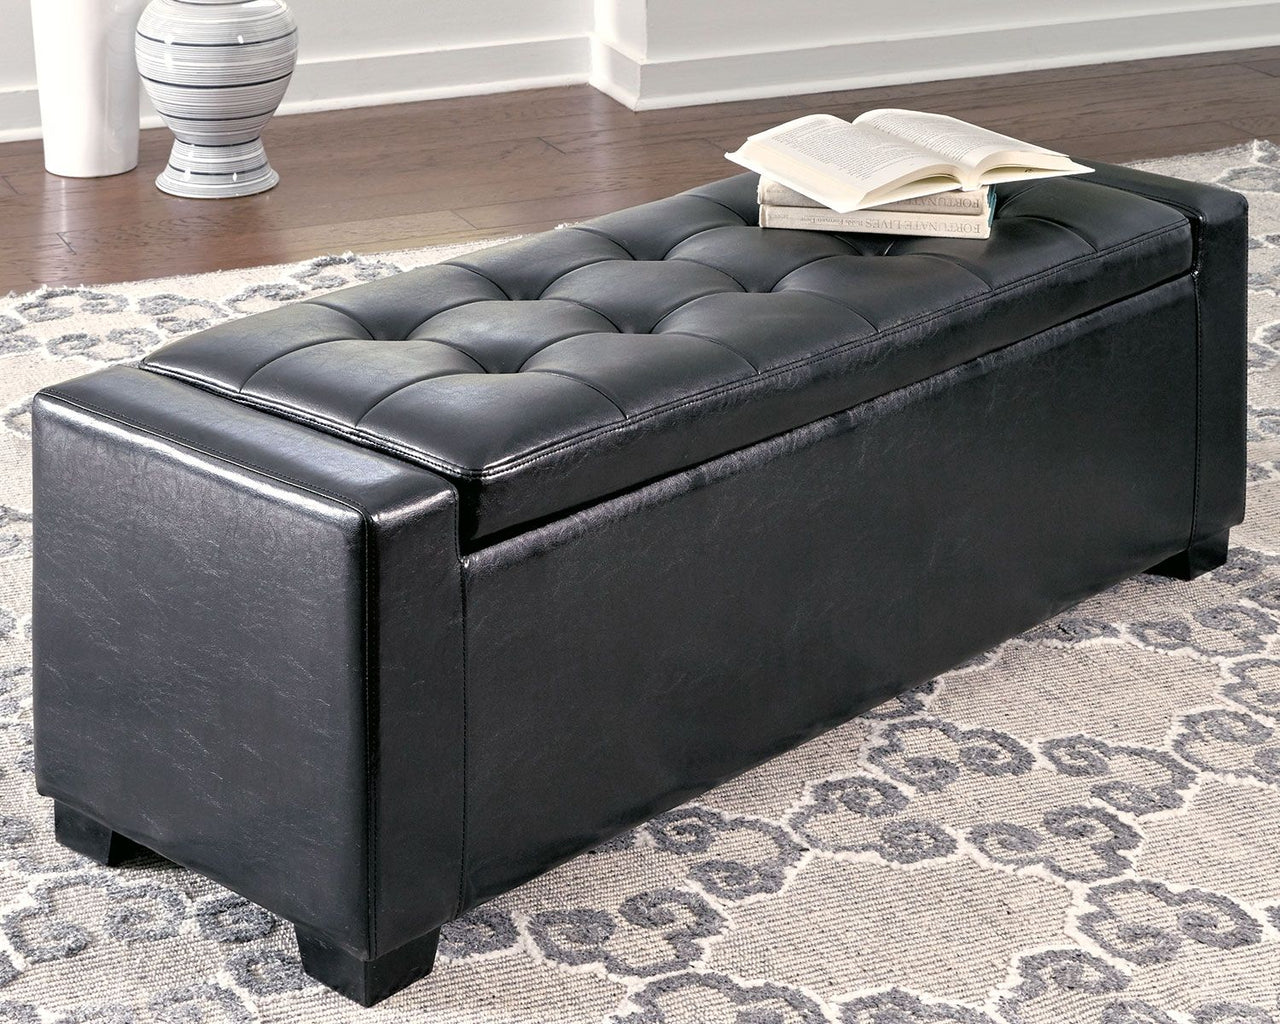 Benches - Black - Upholstered Storage Bench - Faux Leather - Tony's Home Furnishings